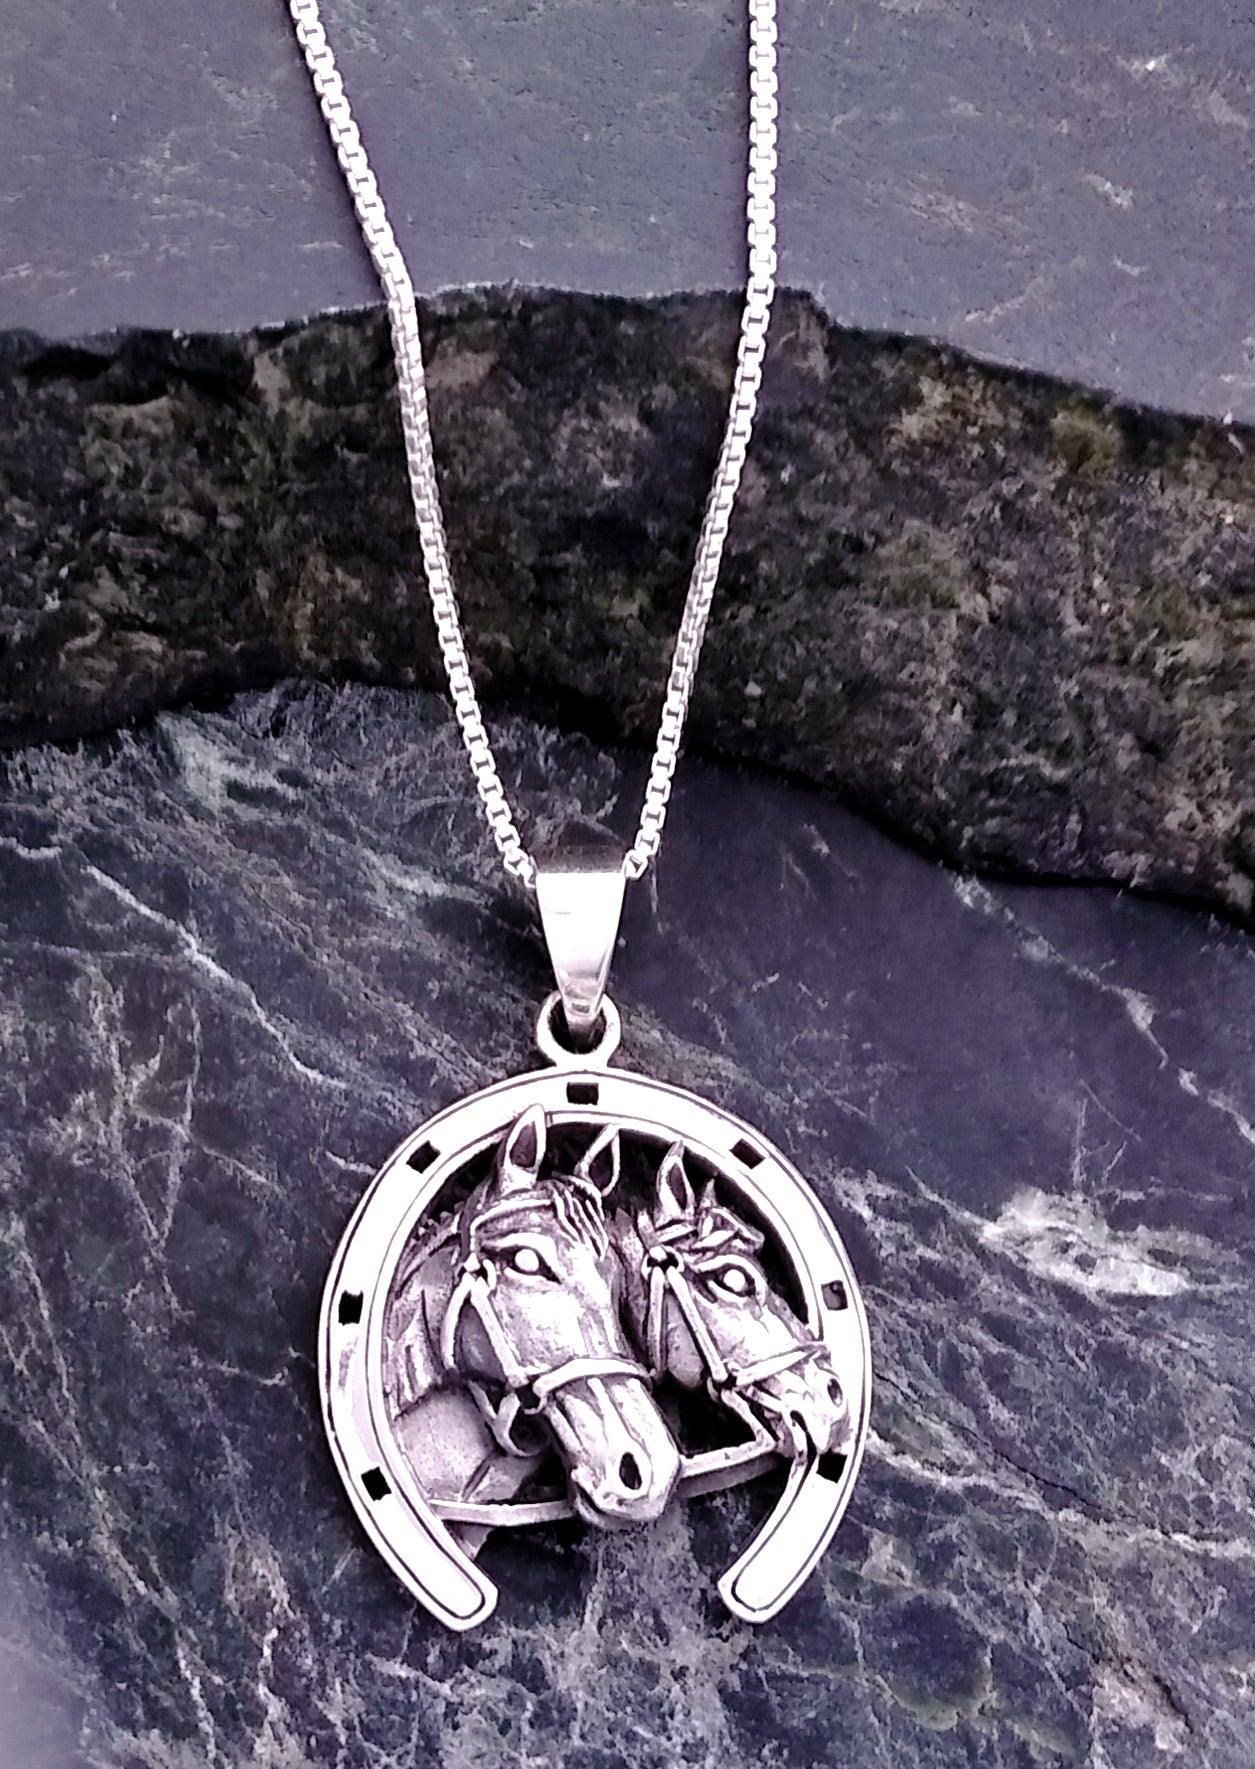 Sterling Pendant with 2 Horses - Silver Parrot, Inc. 